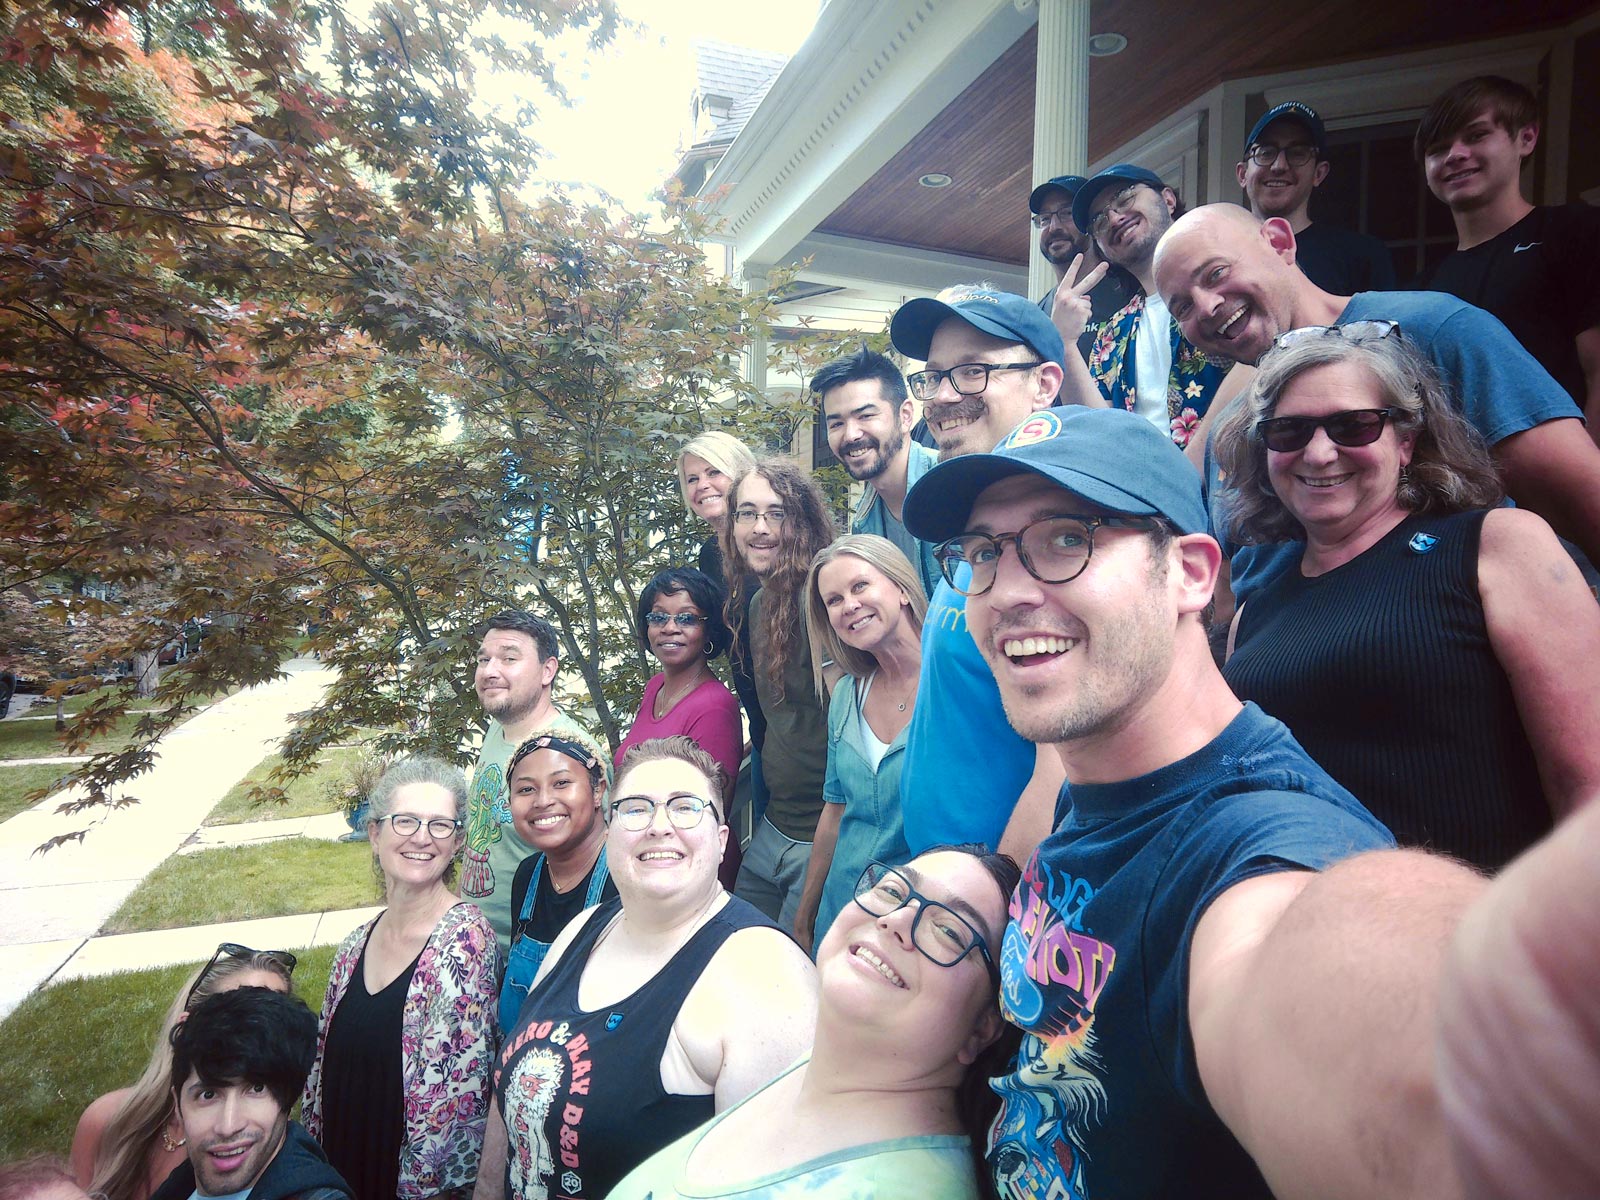 Nathan holds the camera for a Sandstorm group selfie on the stairs at Sandy's house